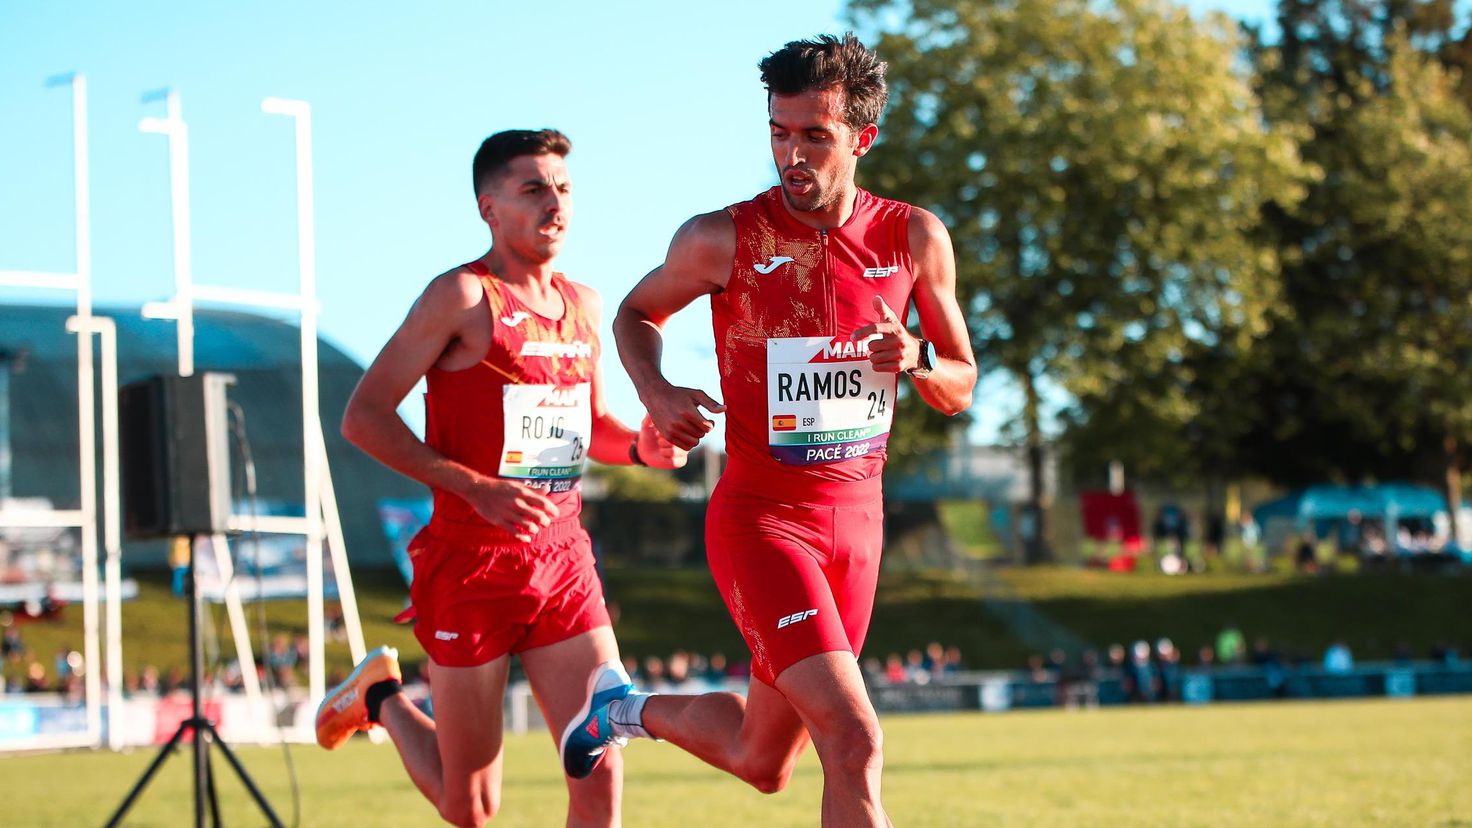 Spain, for the Champions of the 10,000 meters with ten athletes
